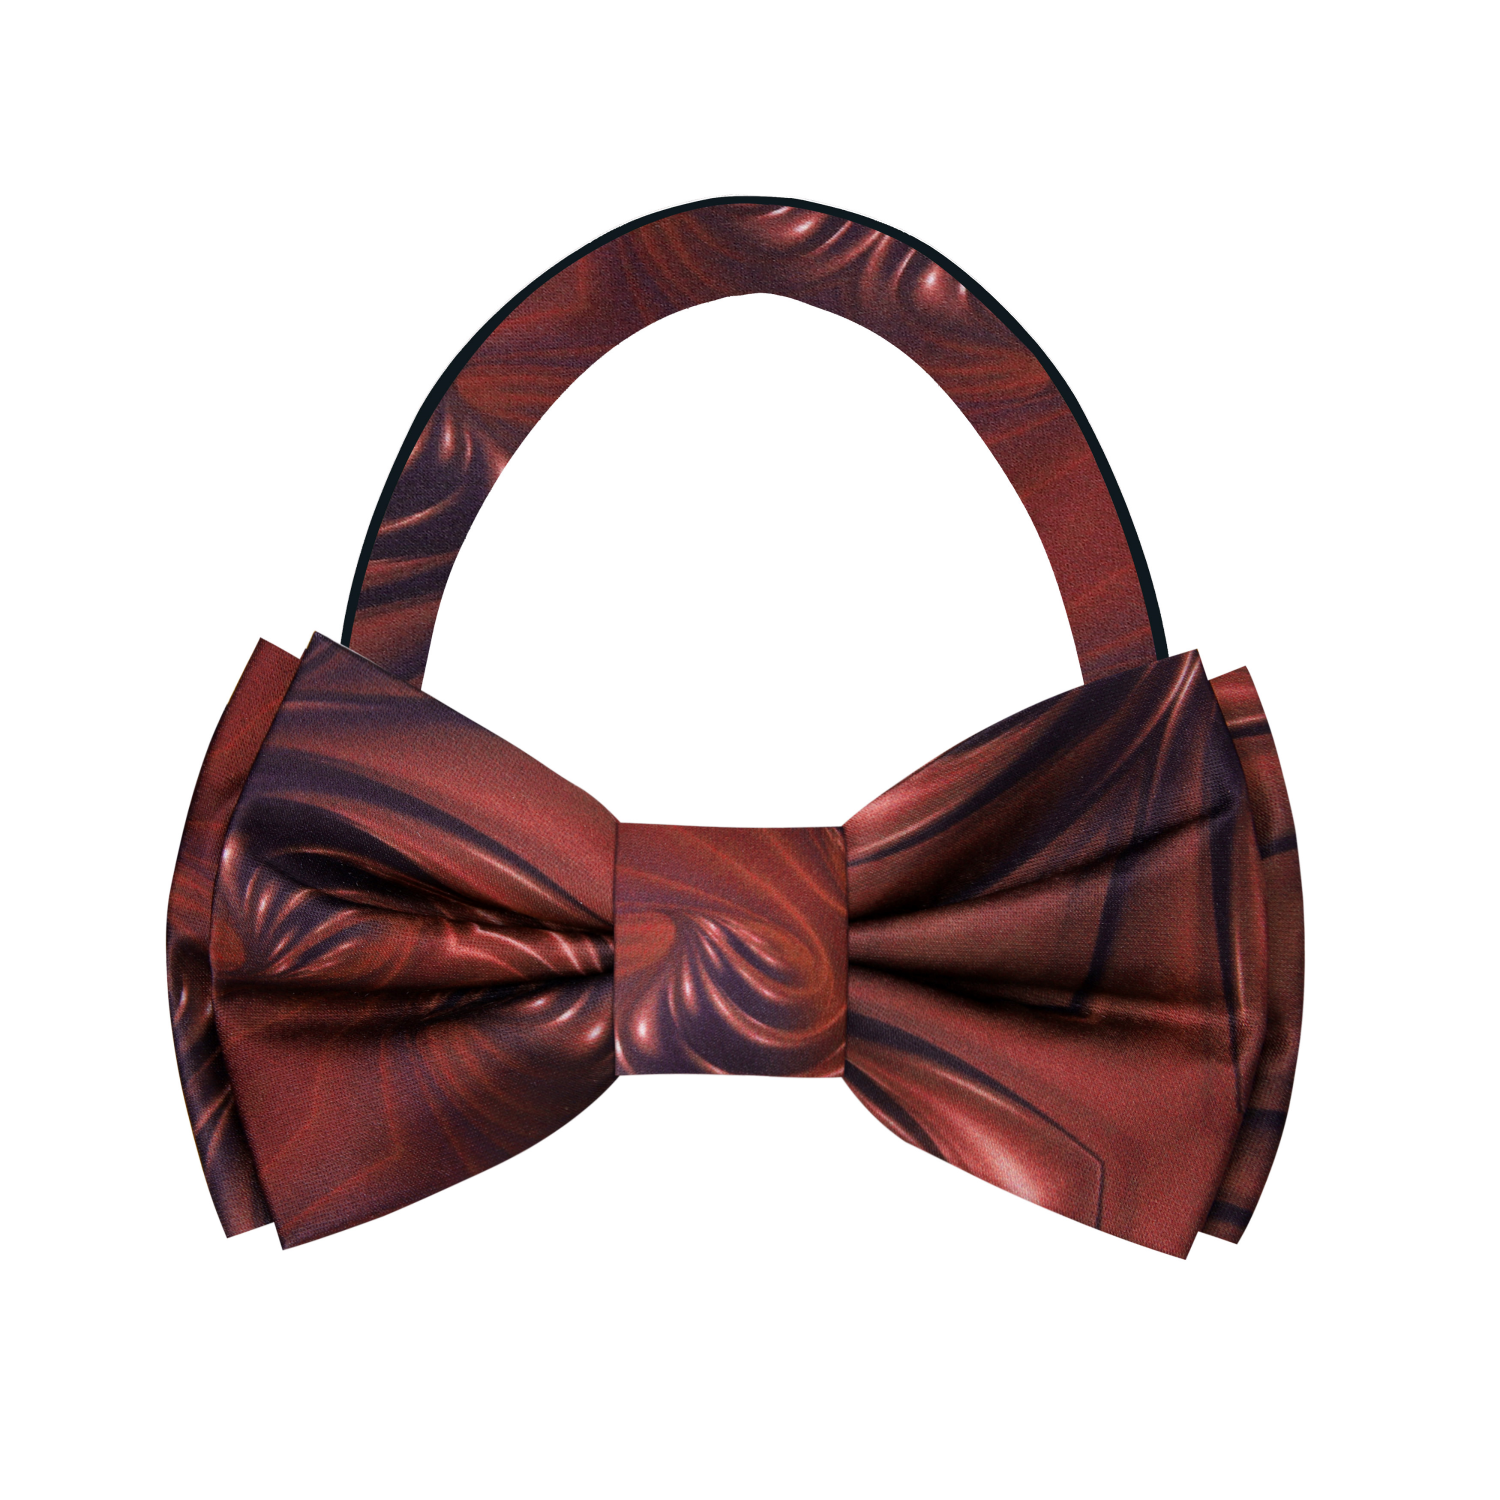 Shades of Brown Swirling Chocolate Bow Tie Pre Tied